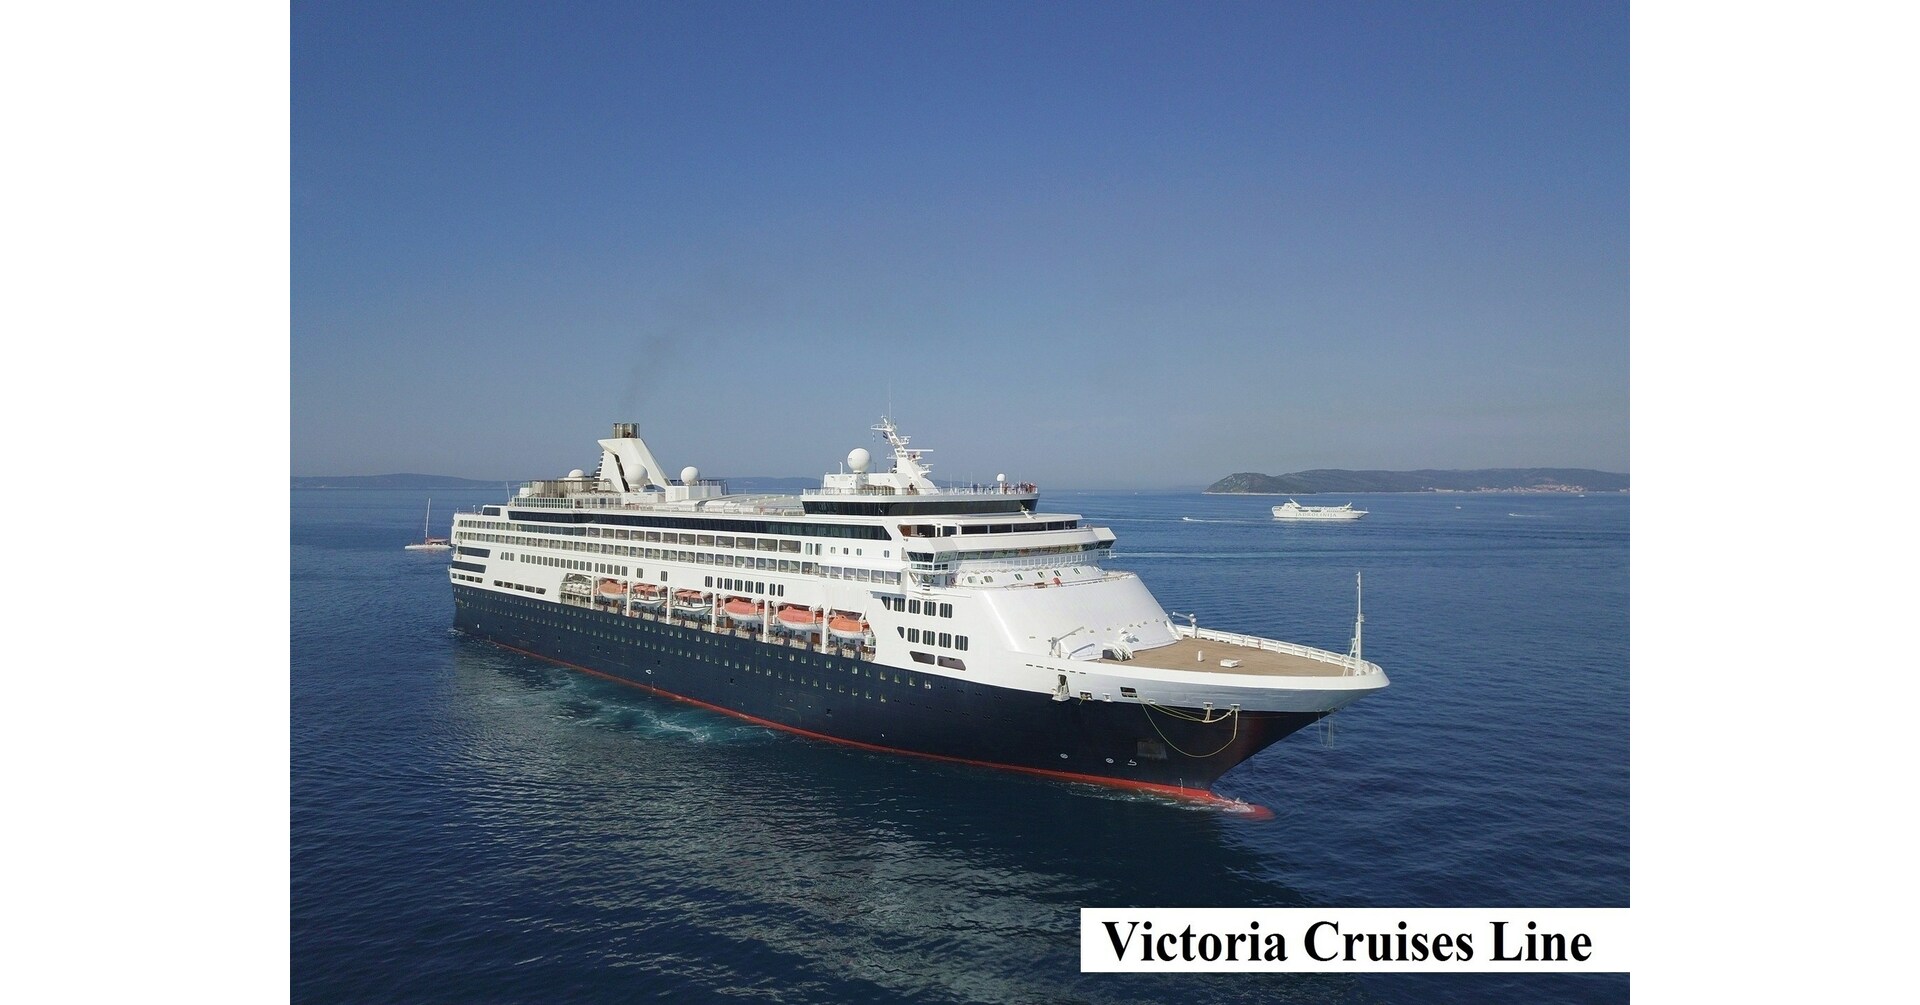 Embark On an Exciting Life at Sea Exploring the World in Luxury: Victoria  Cruises Line Offers a Unique but Affordable Residential Ship Experience for Adventurous  Travelers